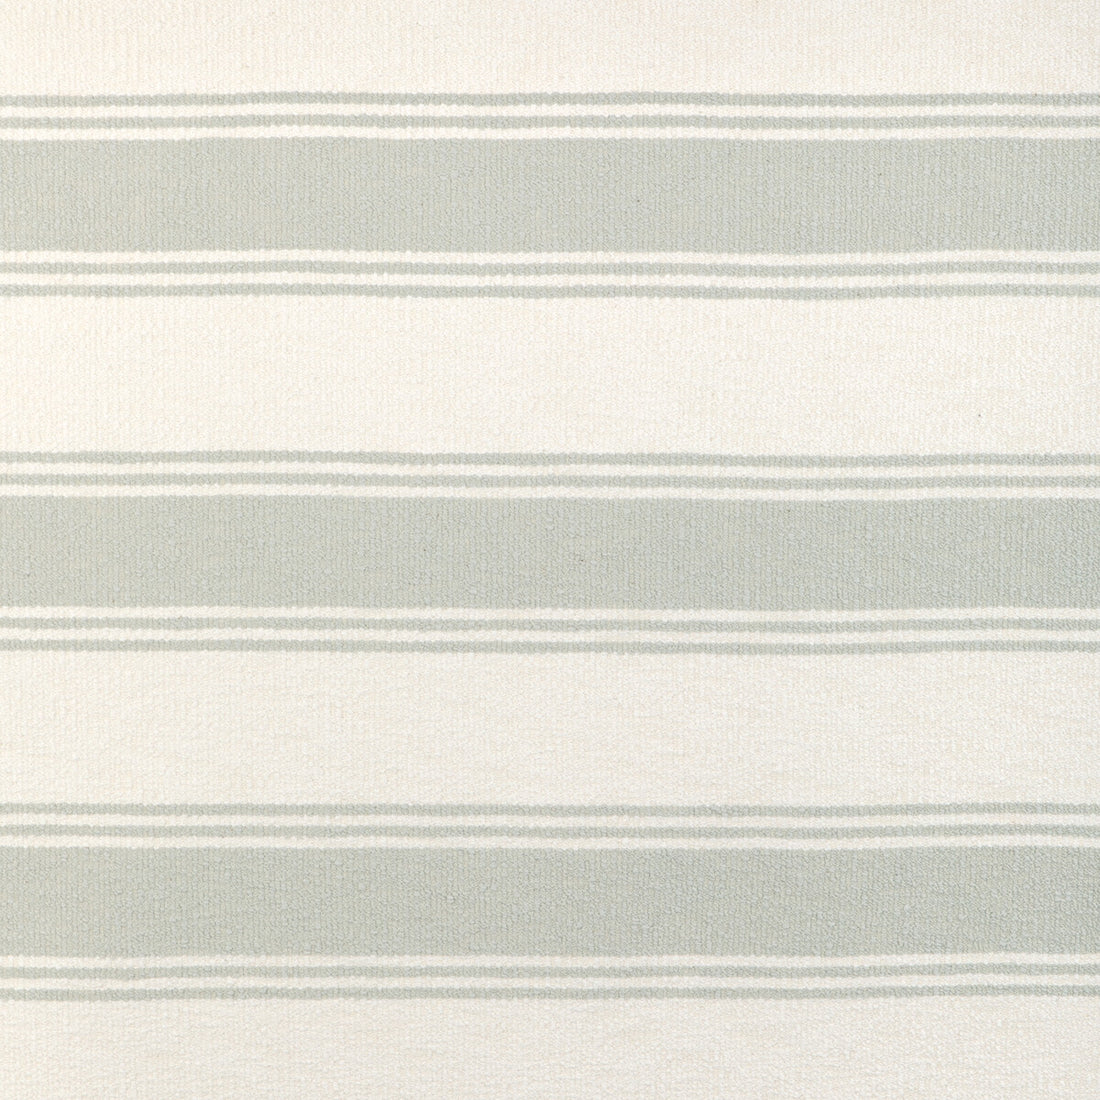 Ona Stripe fabric in pewter color - pattern 36905.11.0 - by Kravet Couture in the Atelier Weaves collection